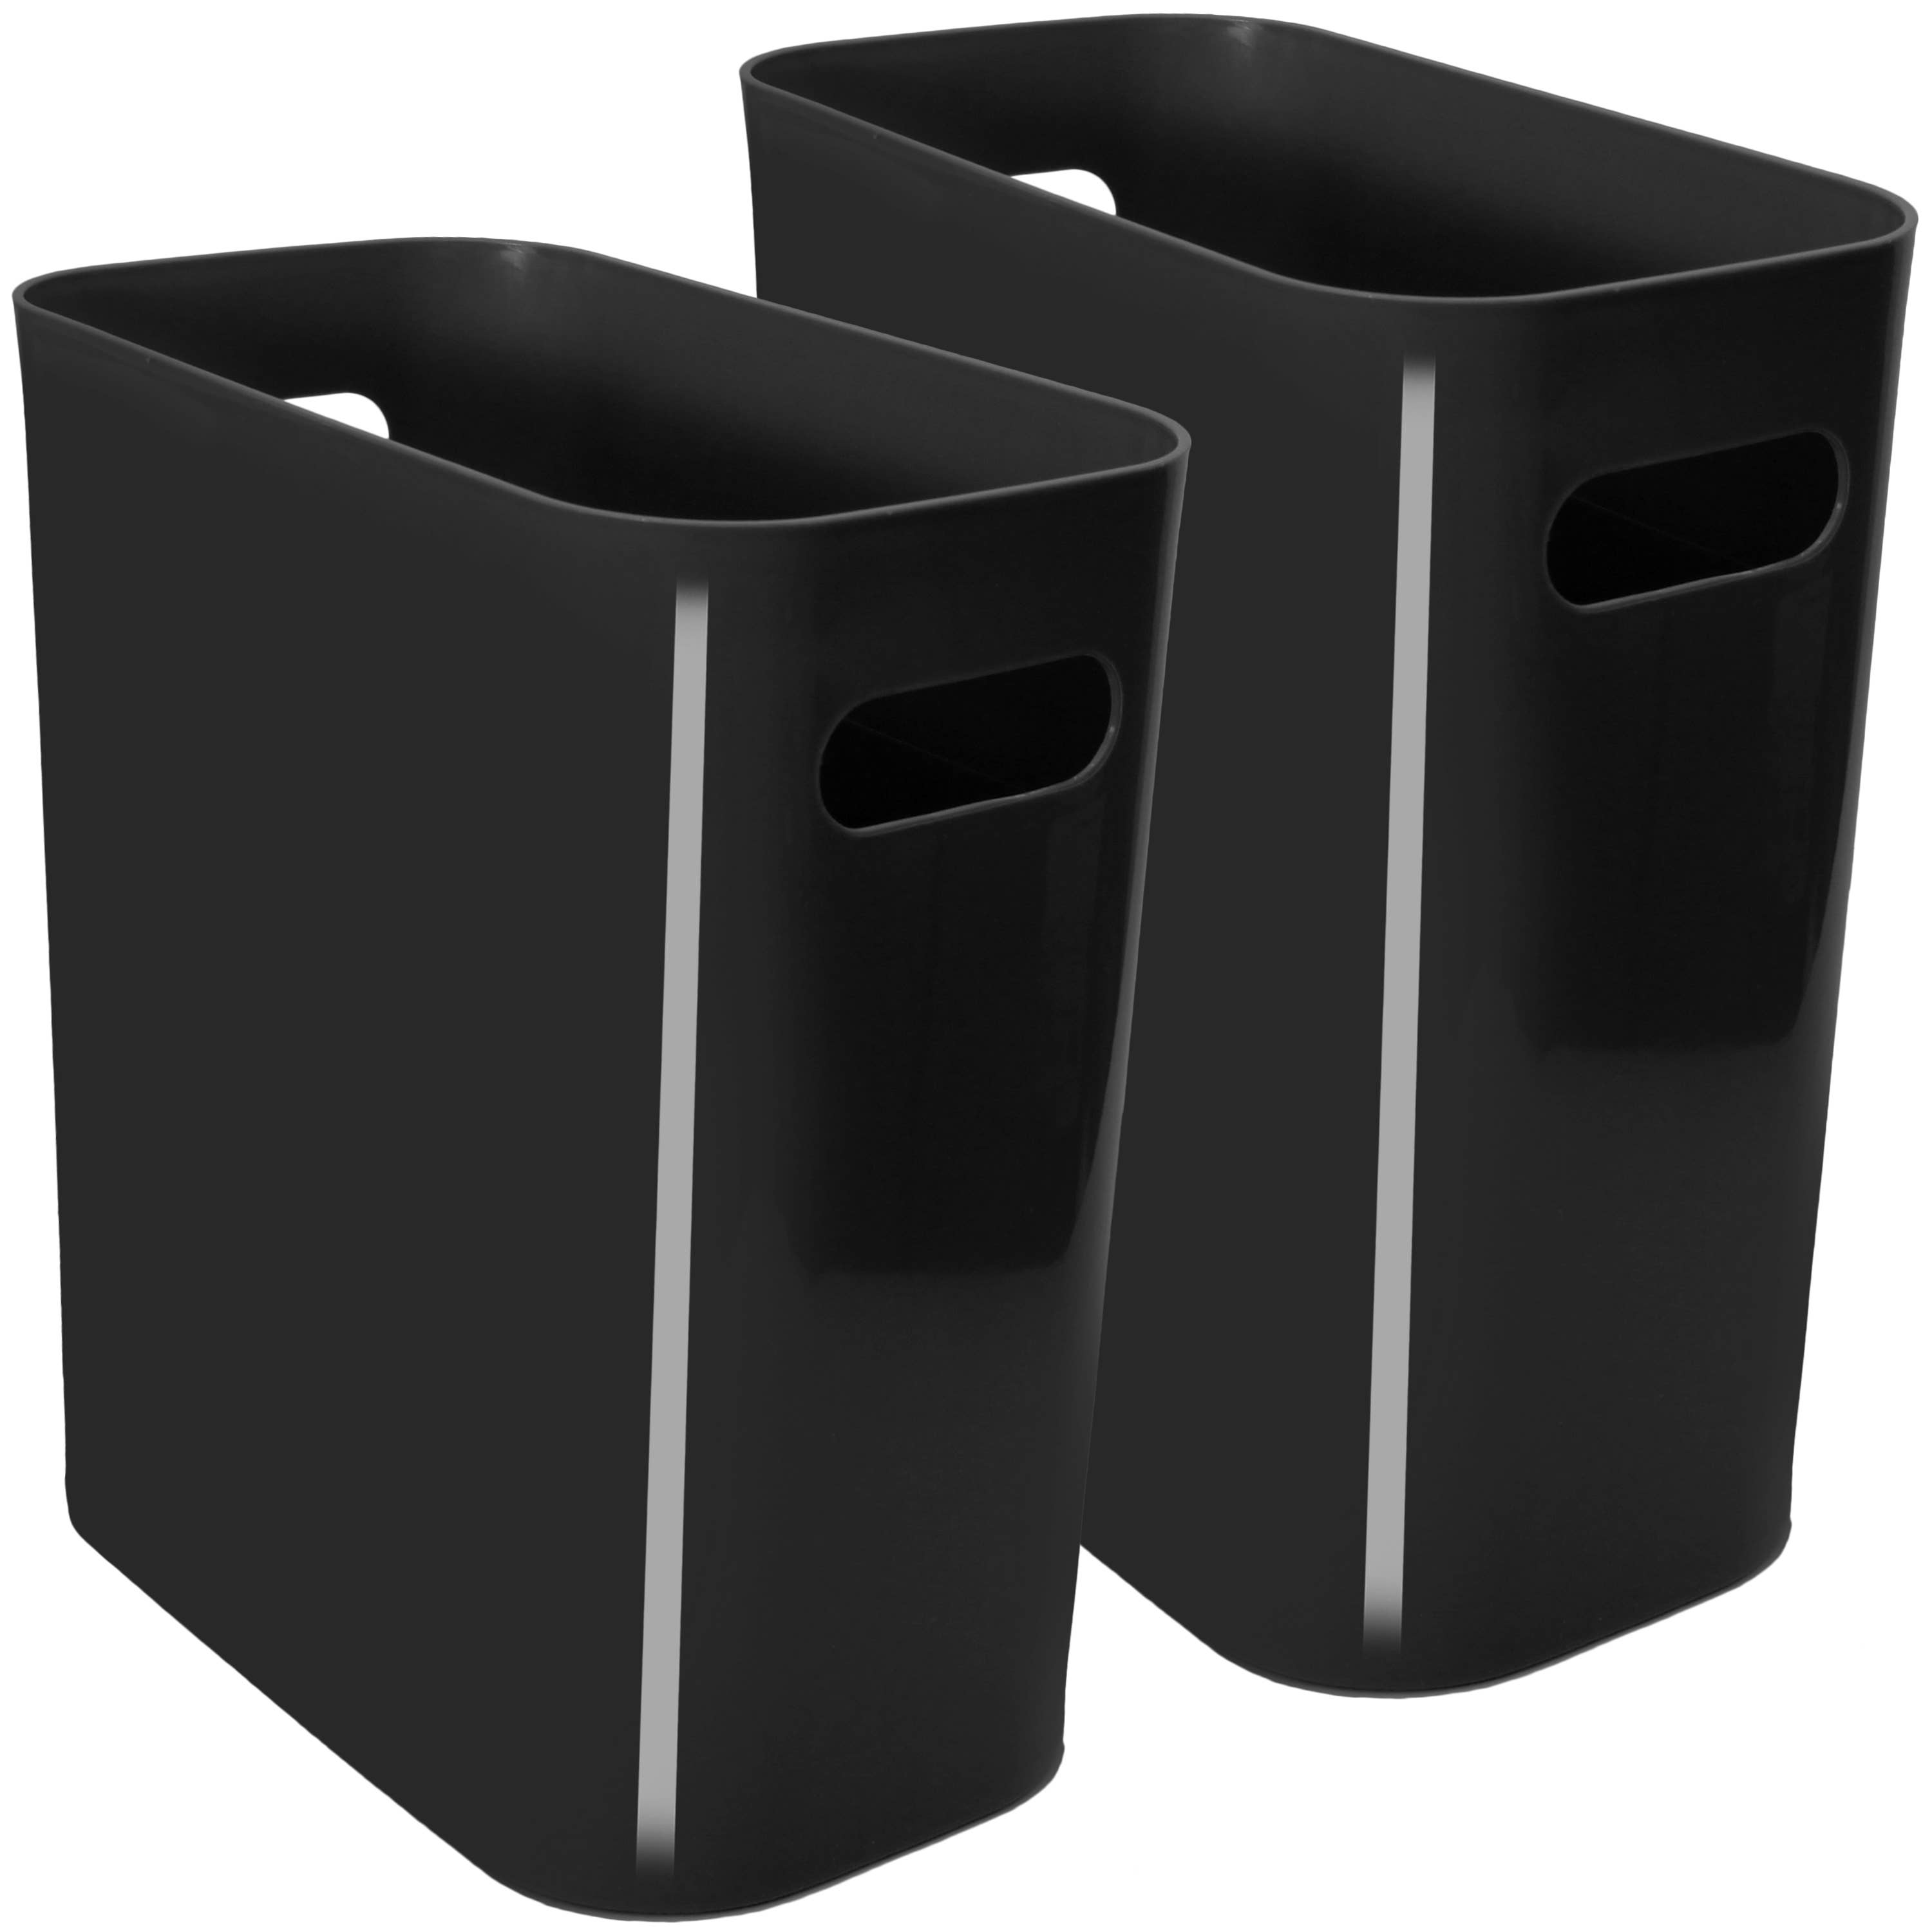 Wholesale waste sorting bins for Better Waste Management –